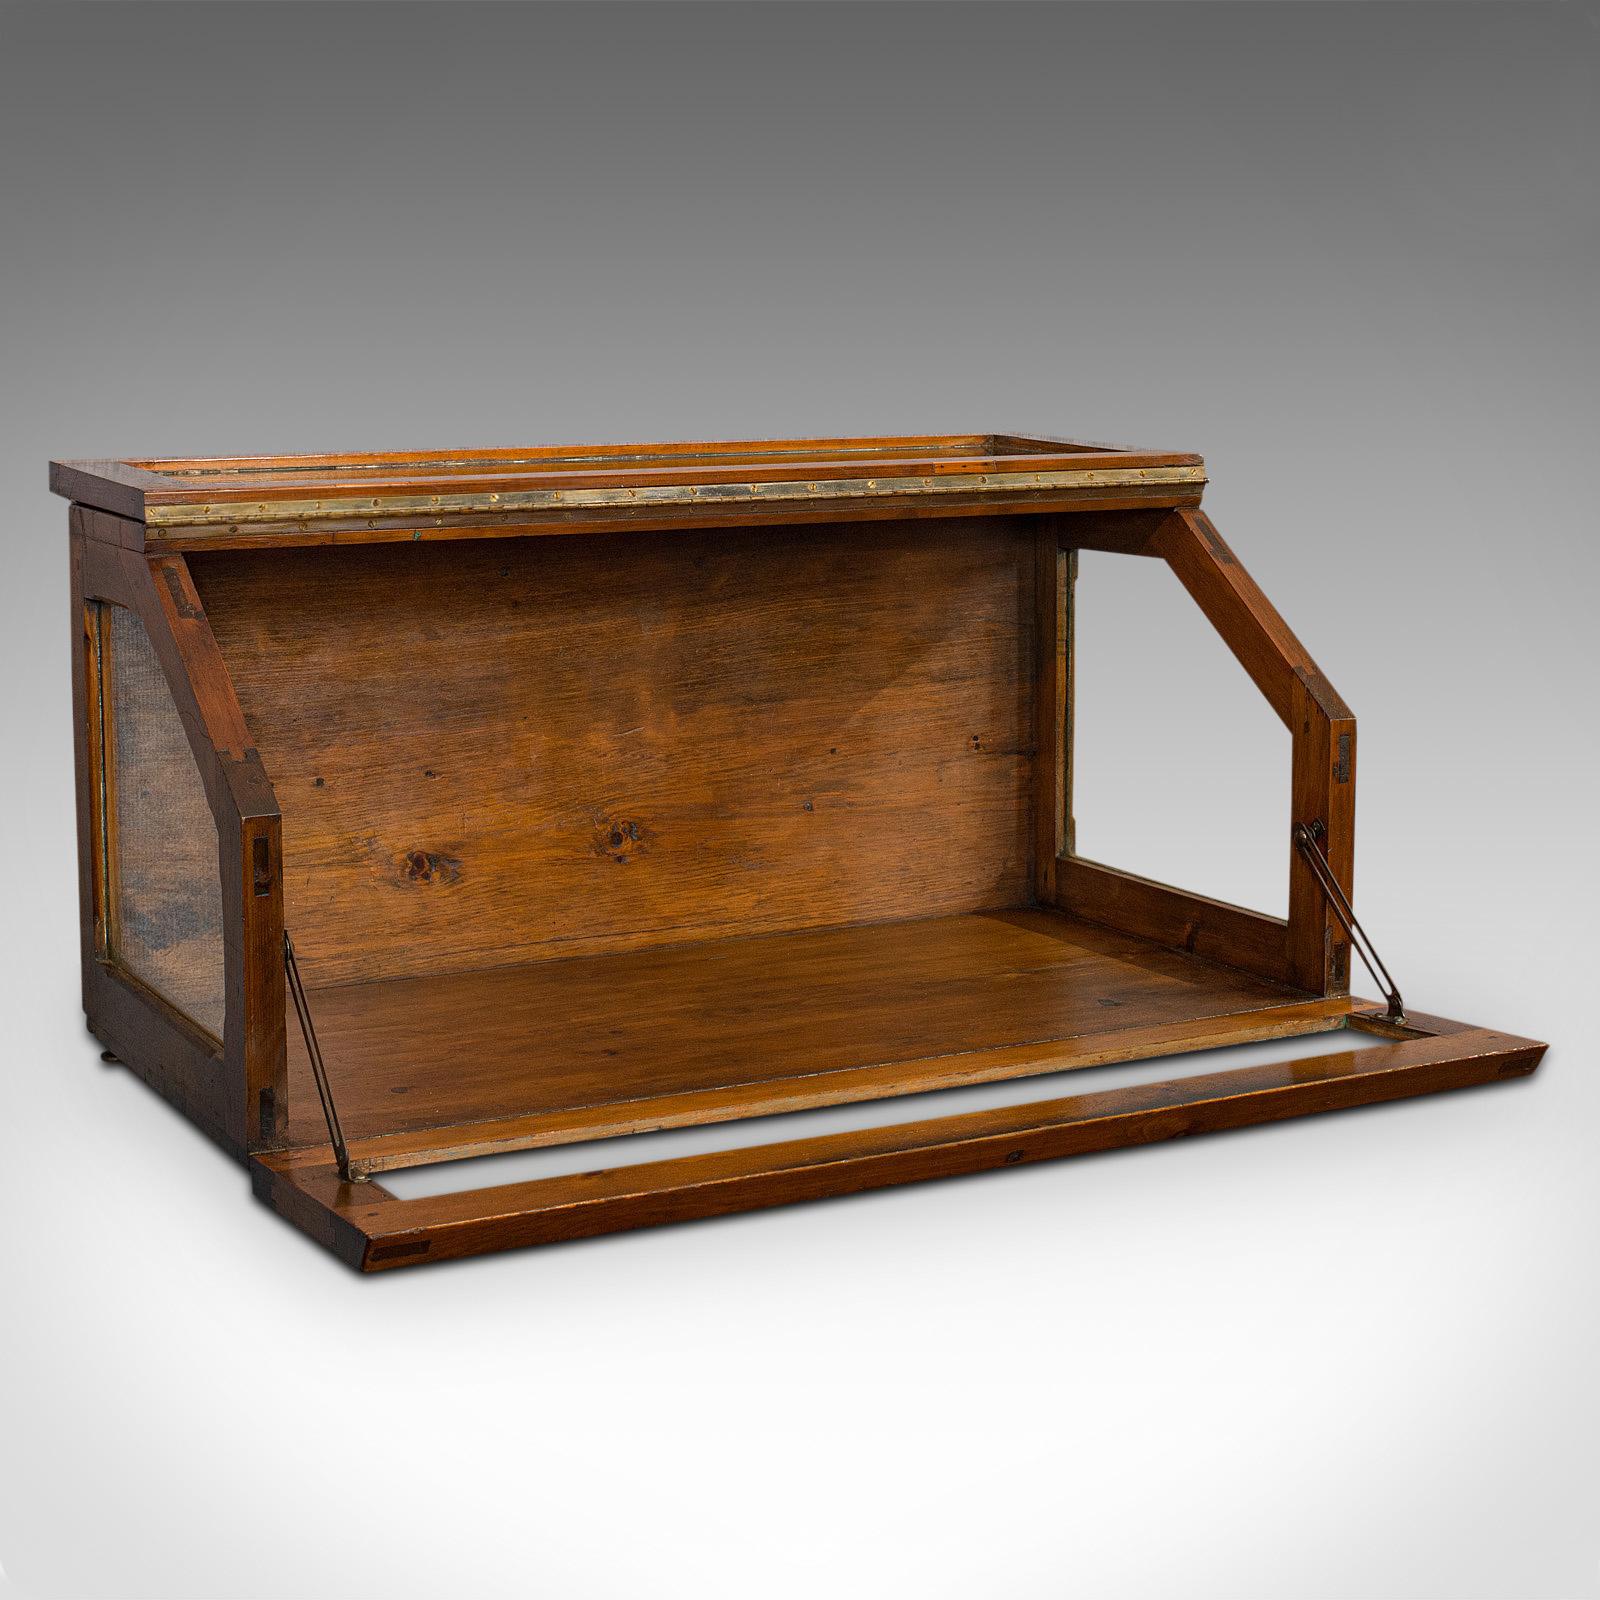 This is an antique display case. An English, pitch pine haberdashery retail counter top cabinet, dating to the Edwardian period, circa 1910. 

Quality Edwardian shop cabinet
Displays a desirable aged patina
Pitch pine shows fine grain